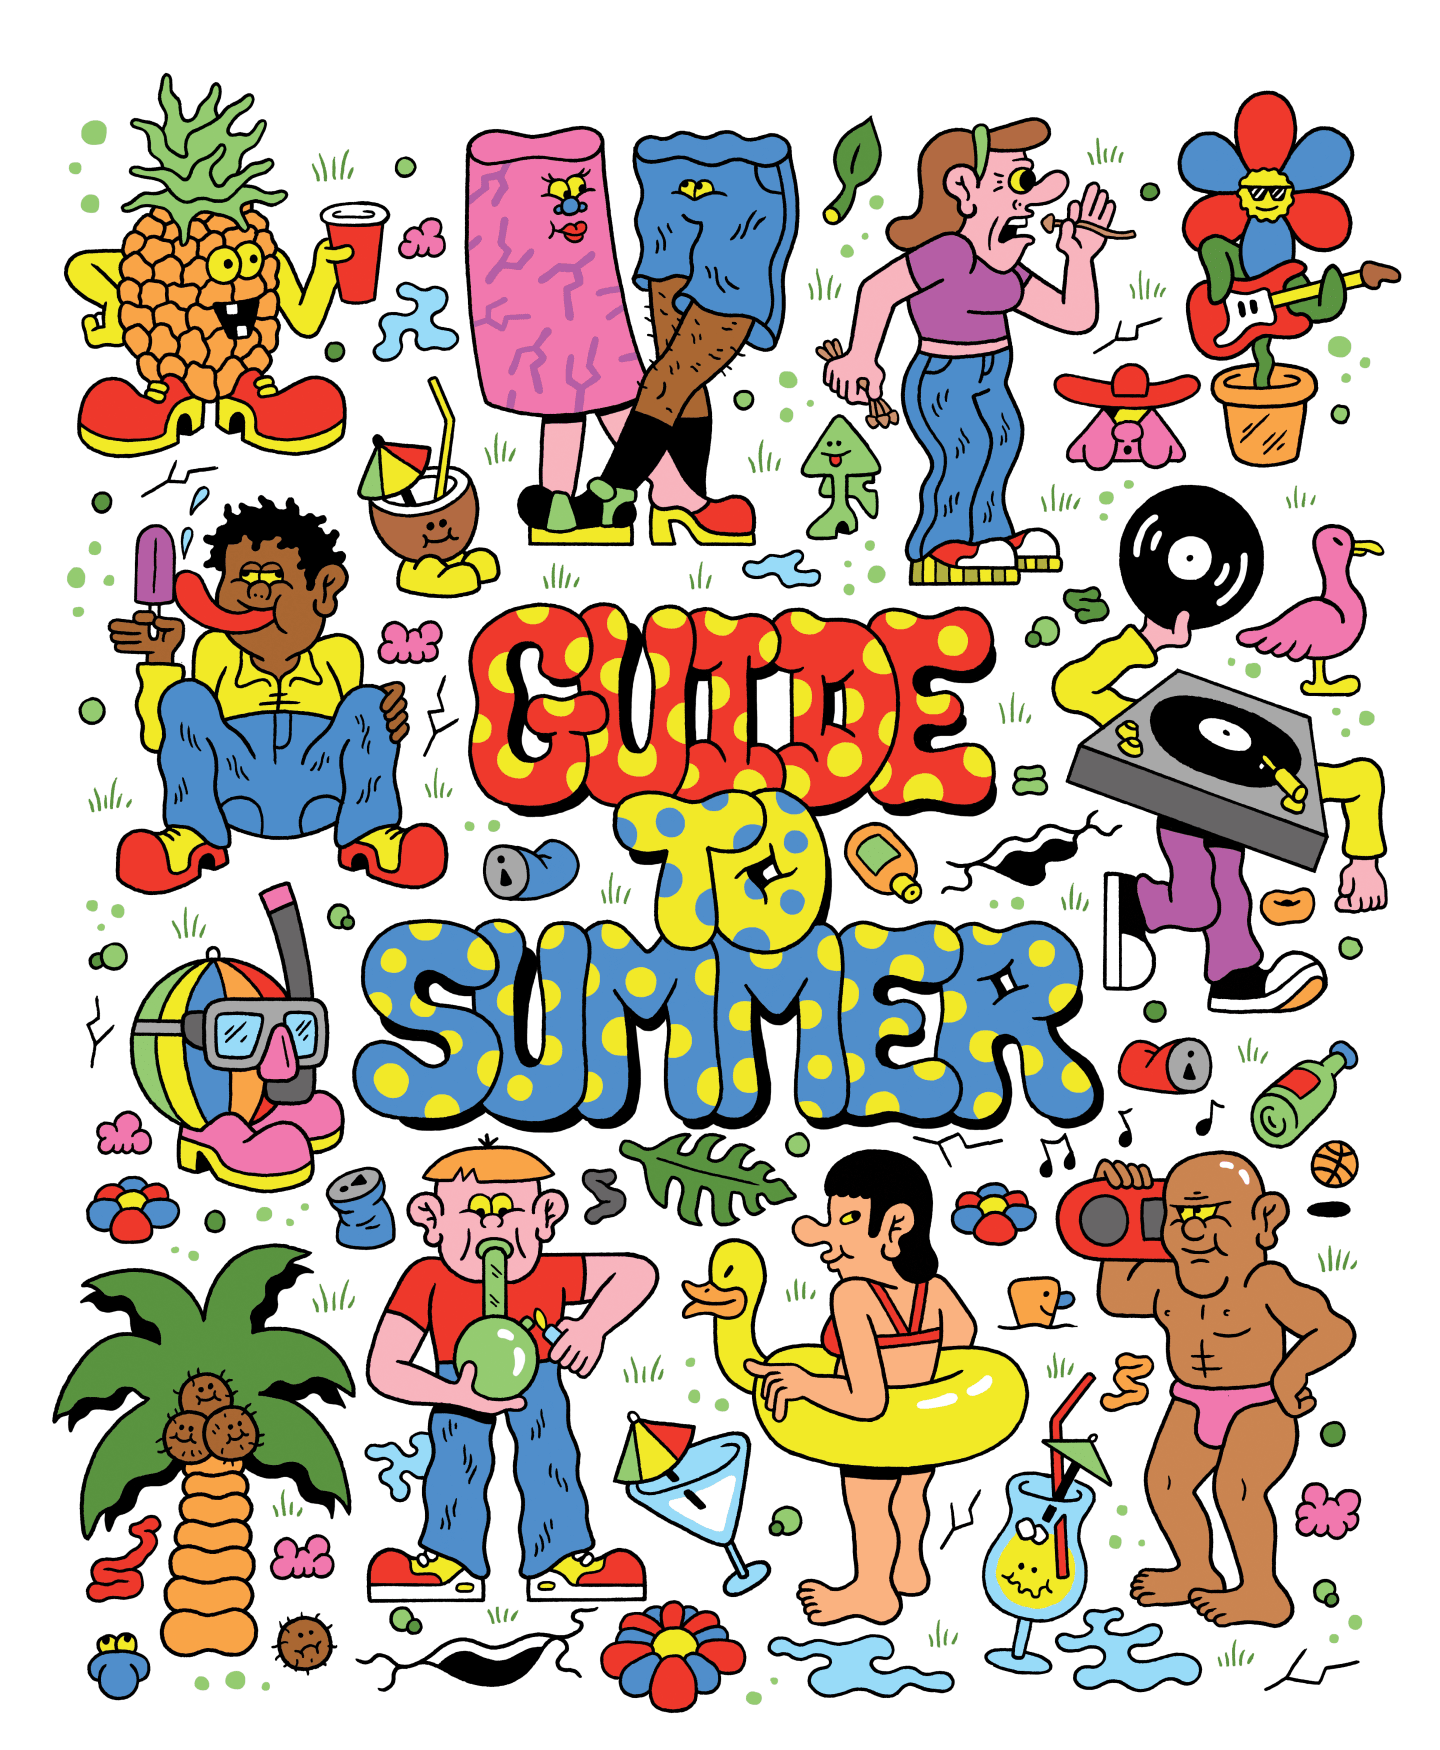 Introducing The FADER’s Guide To Summer 